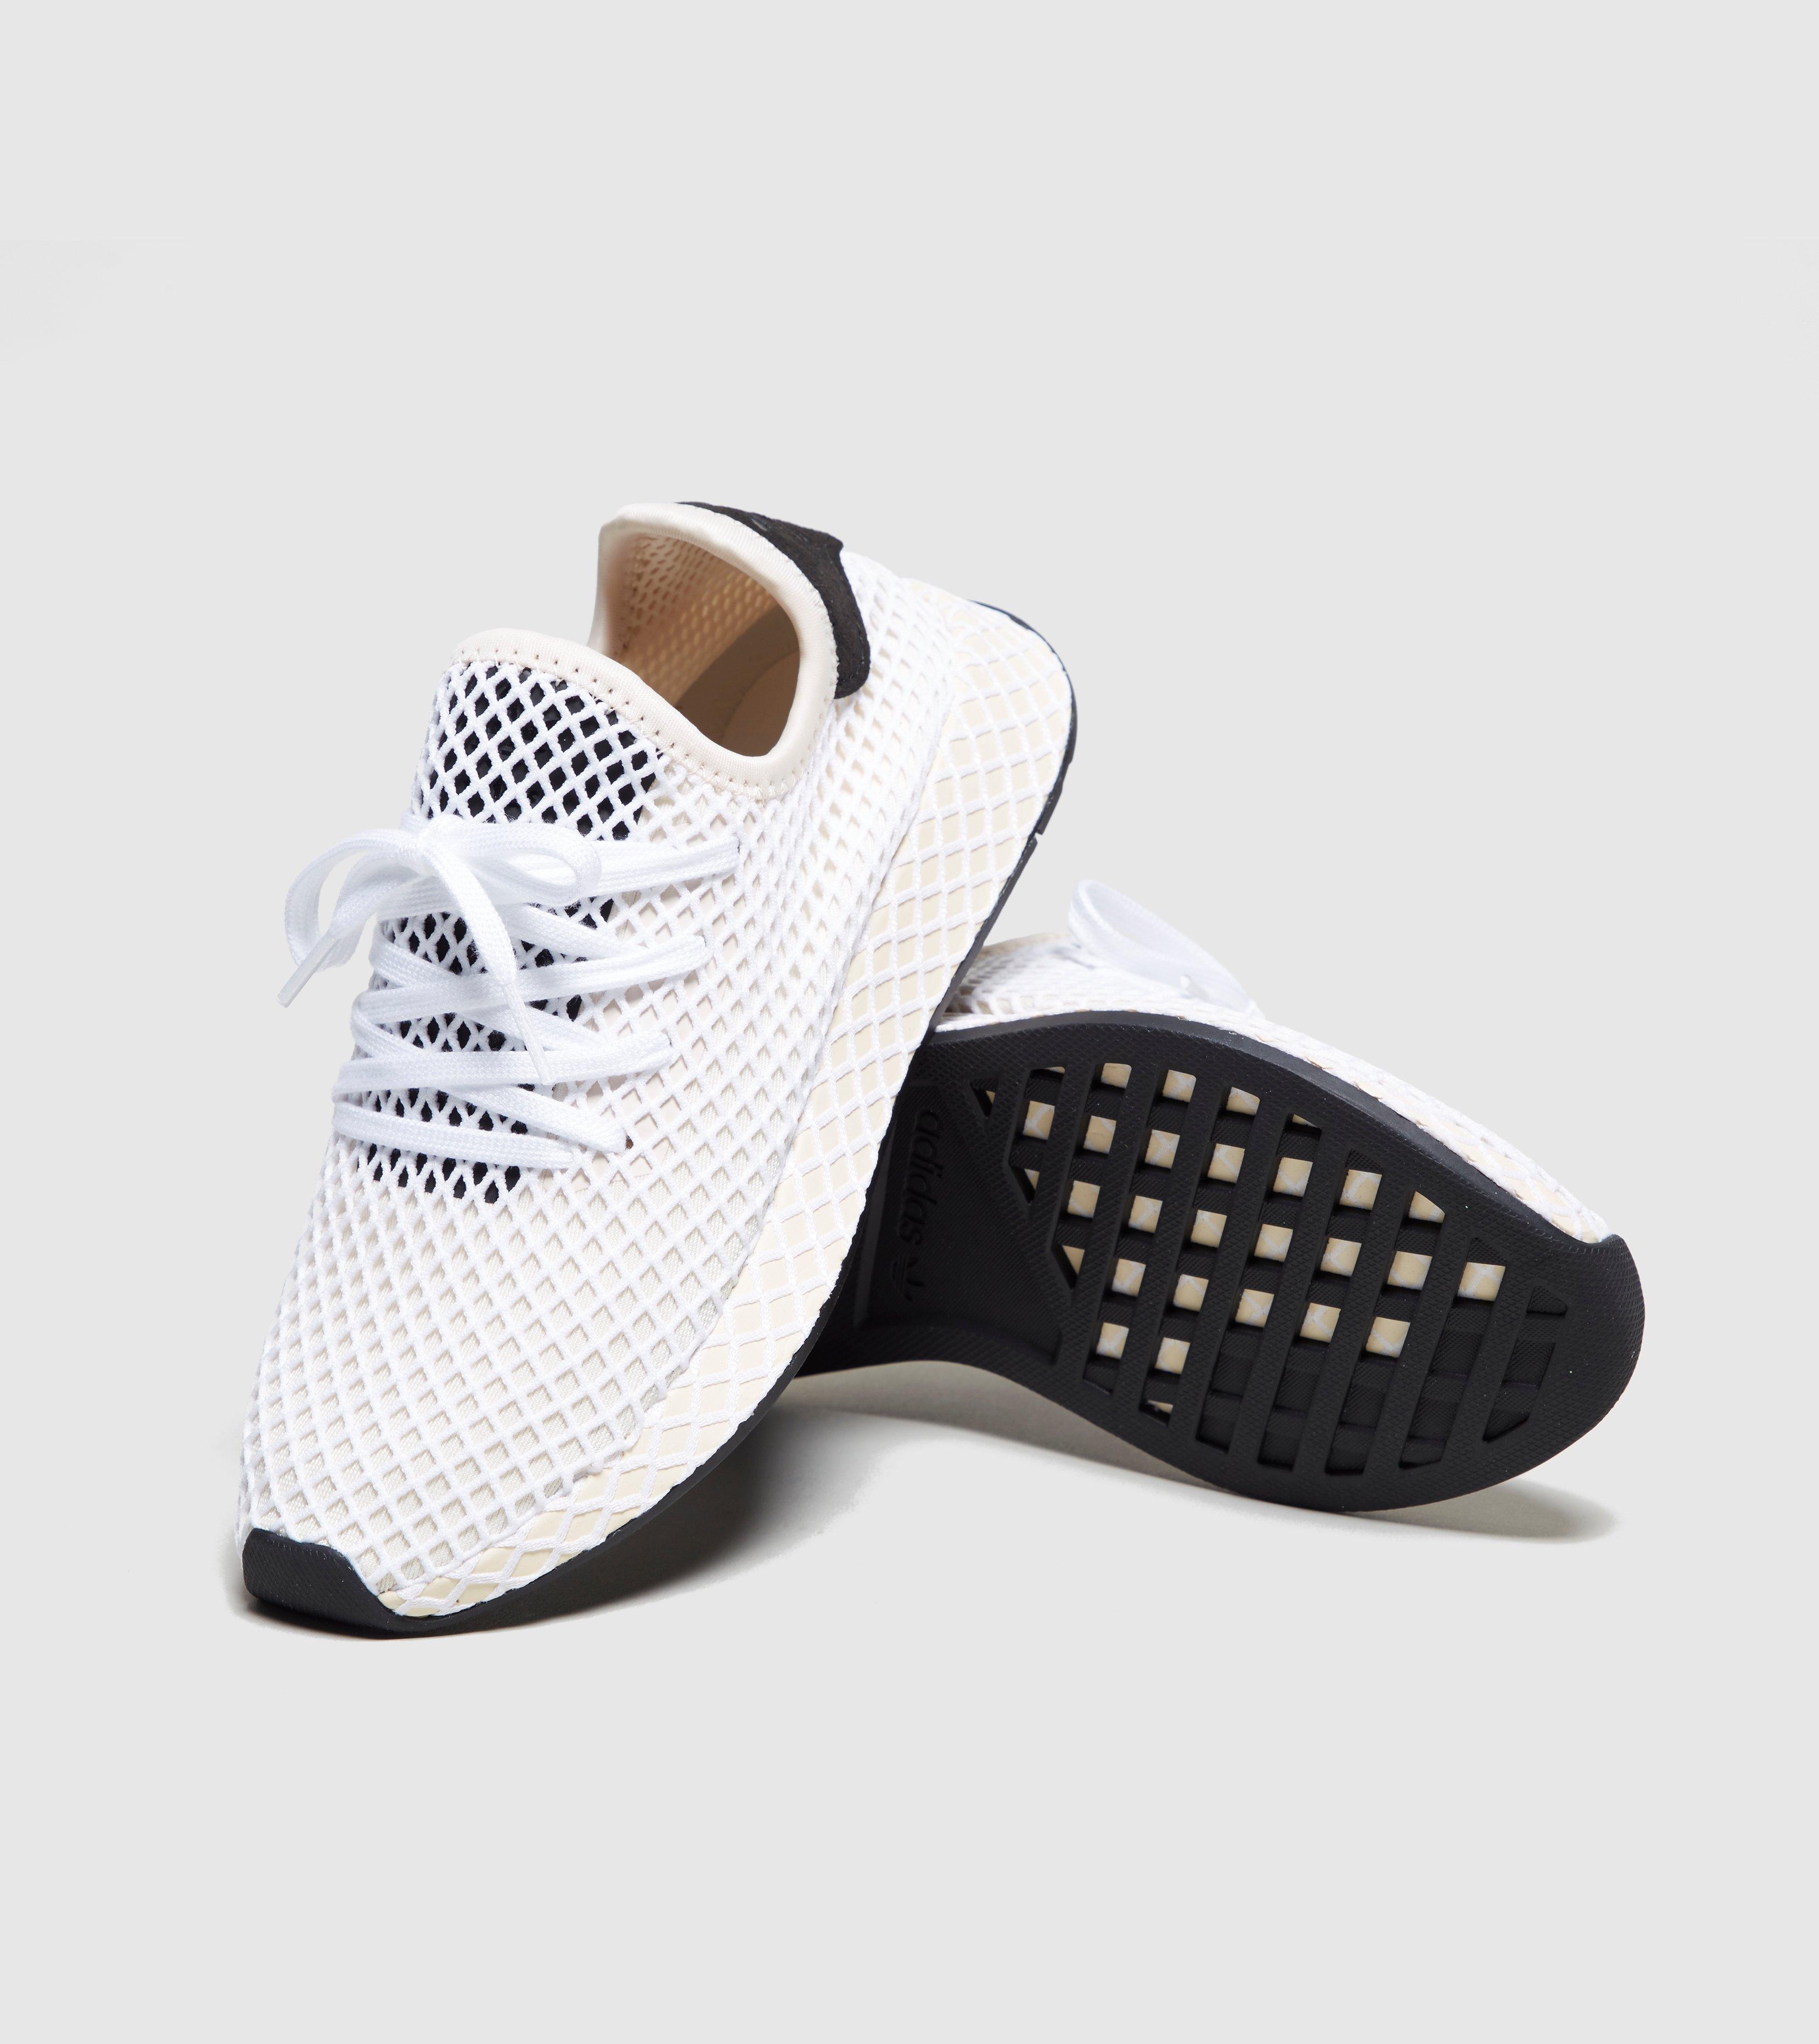 Buy adidas deerupt white and black> OFF-51%